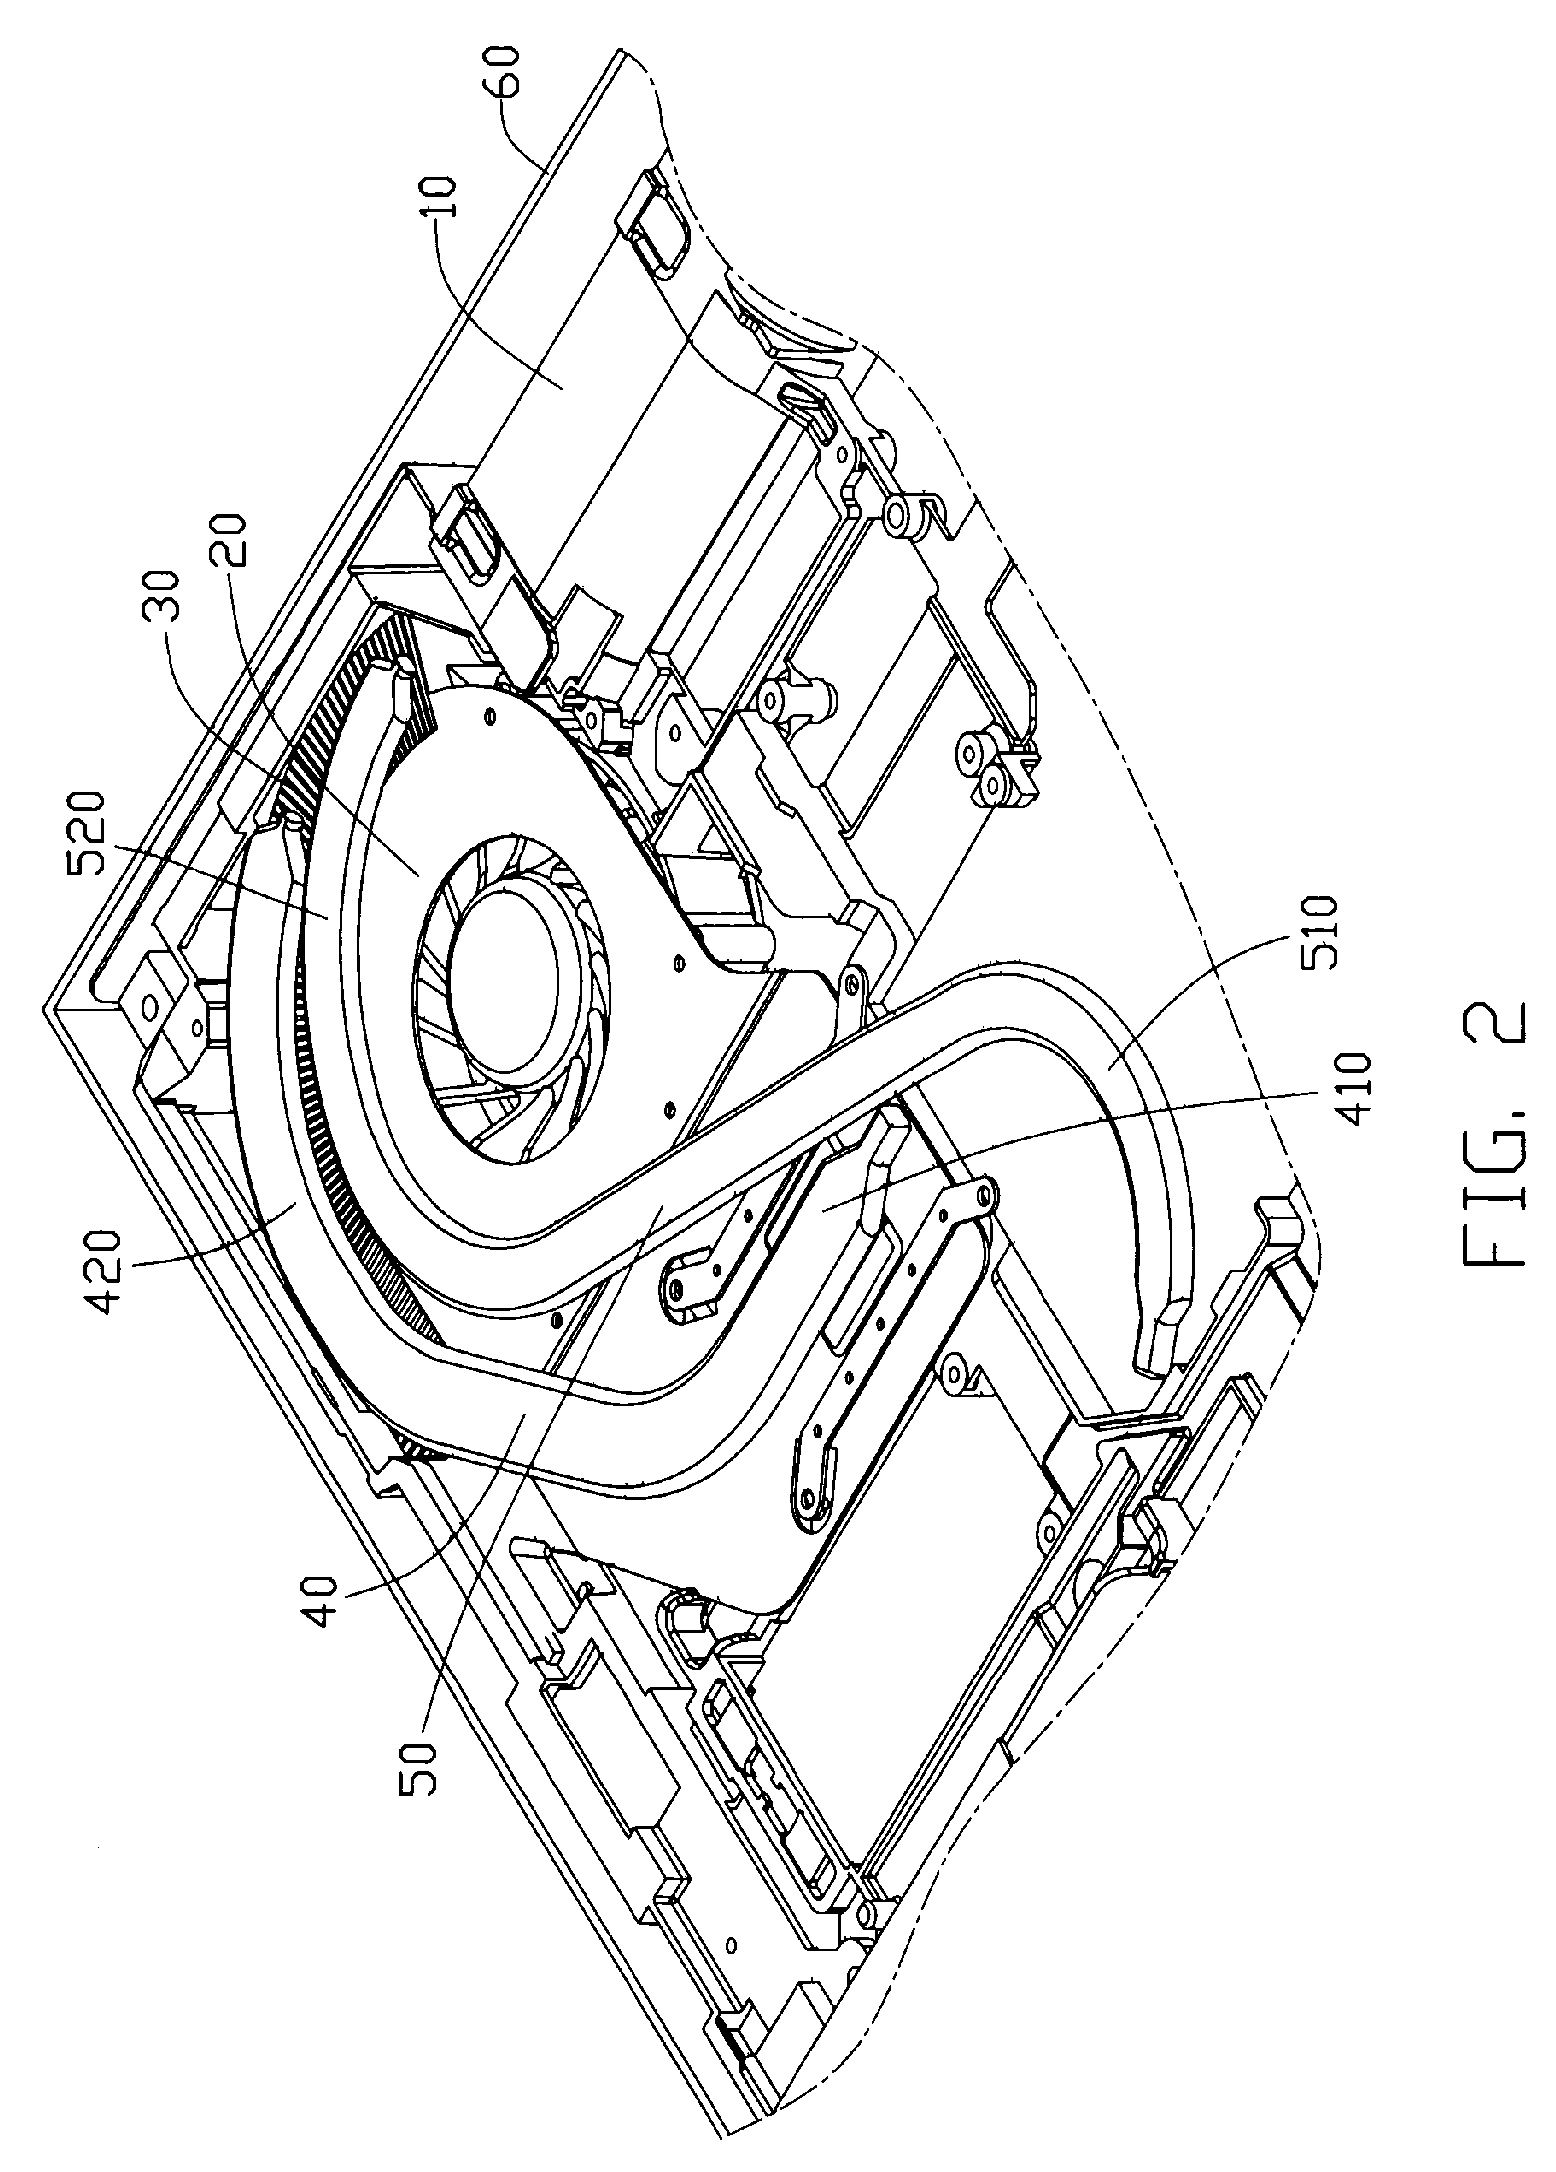 Thermal module having a housing integrally formed with a roll cage of an electronic product